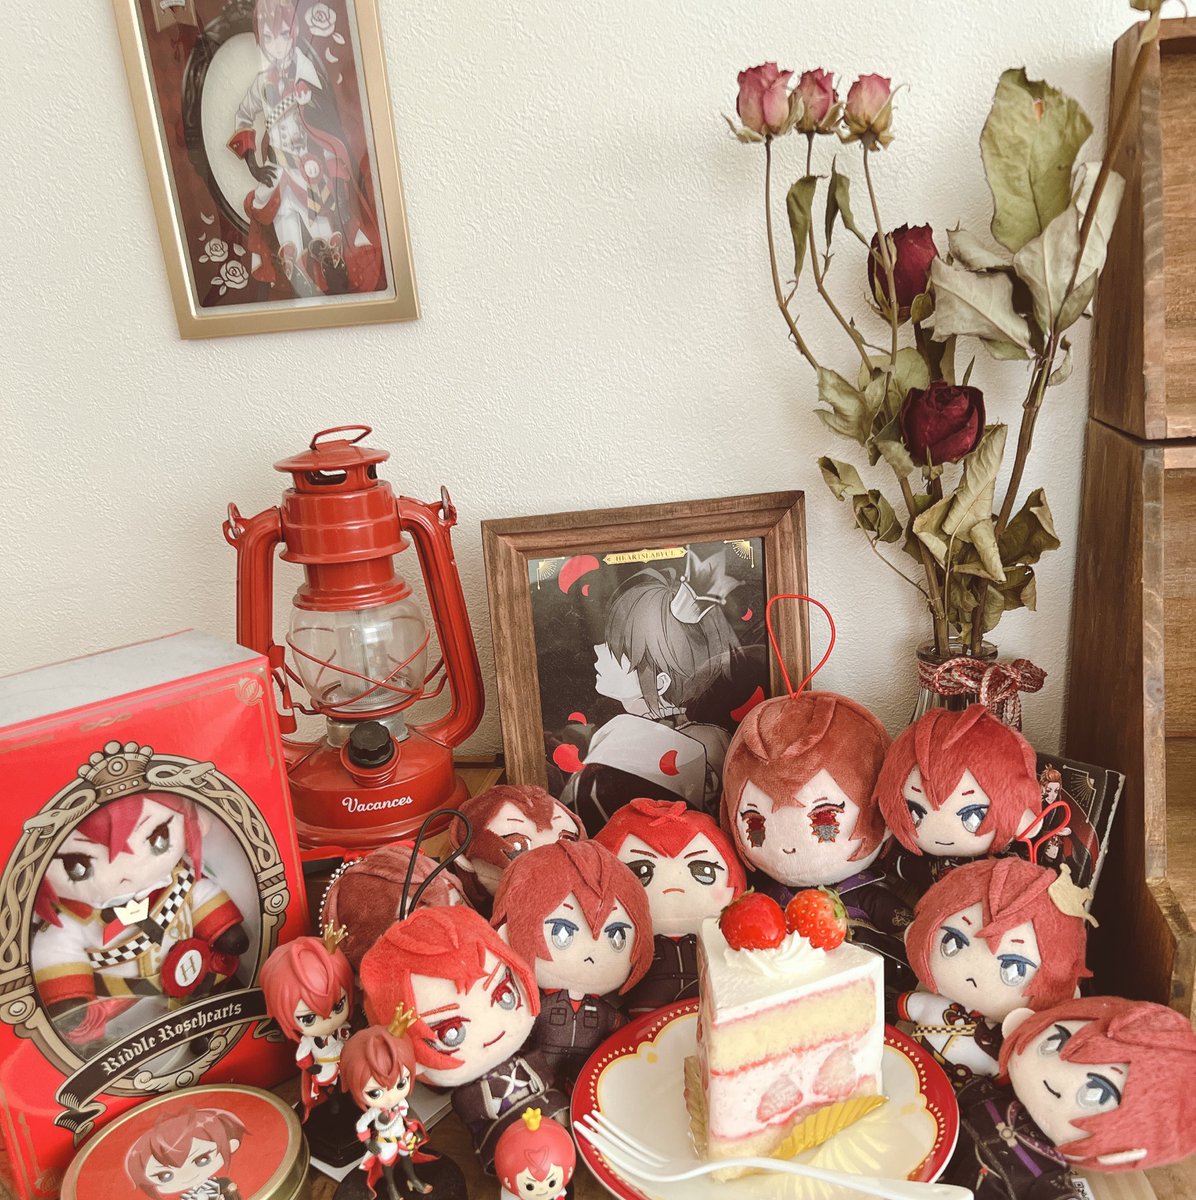 food cake fruit strawberry red hair fork character doll  illustration images